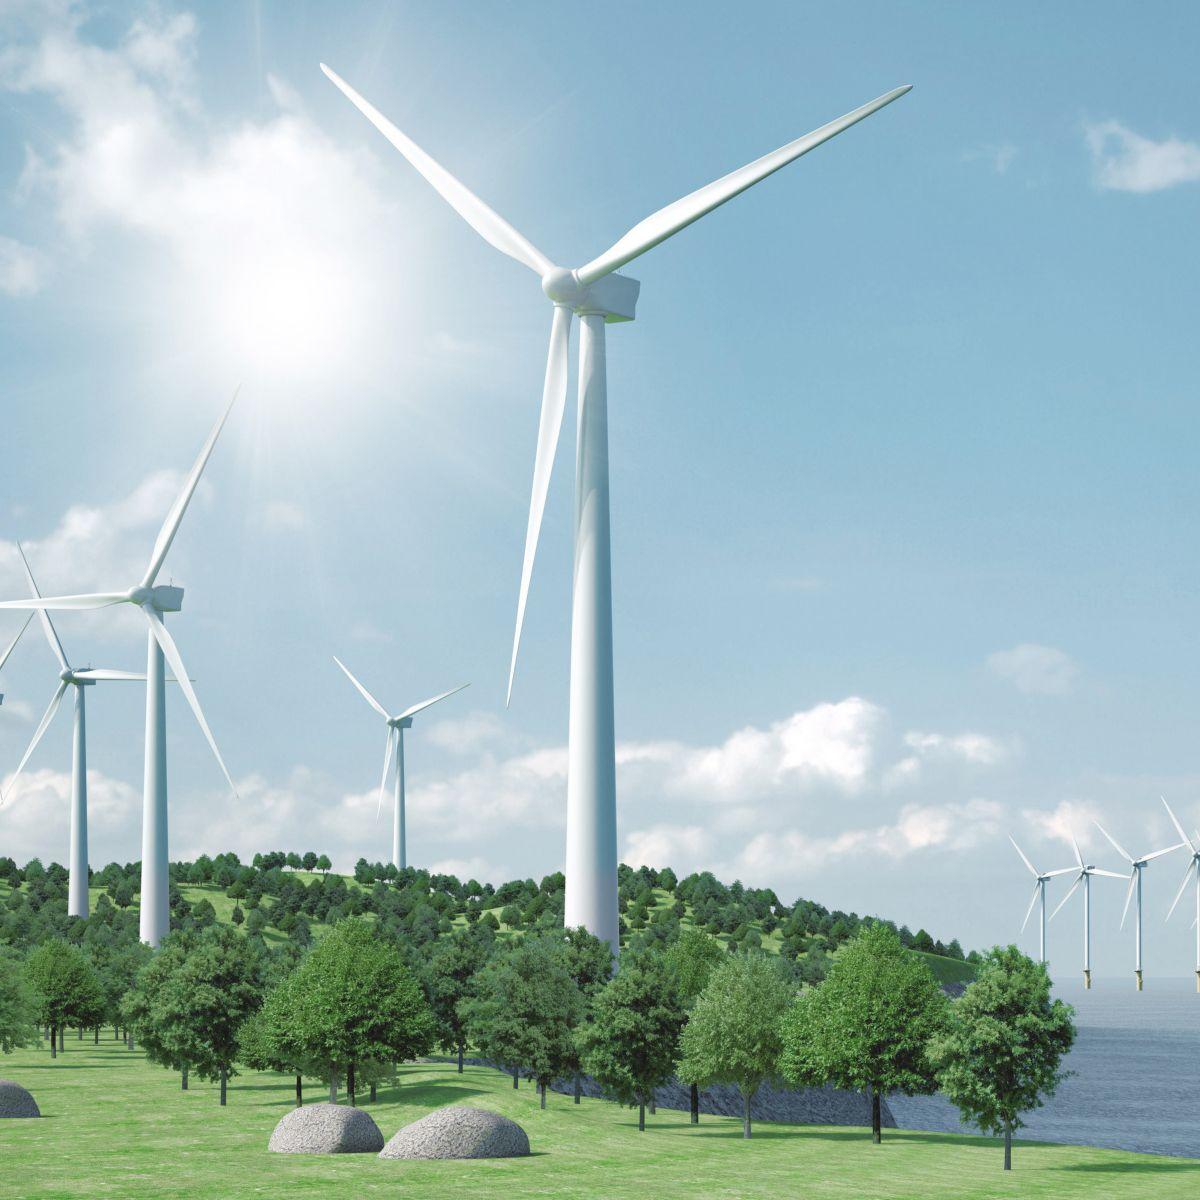 Product: Solutions for Wind Turbine Construction & Repair